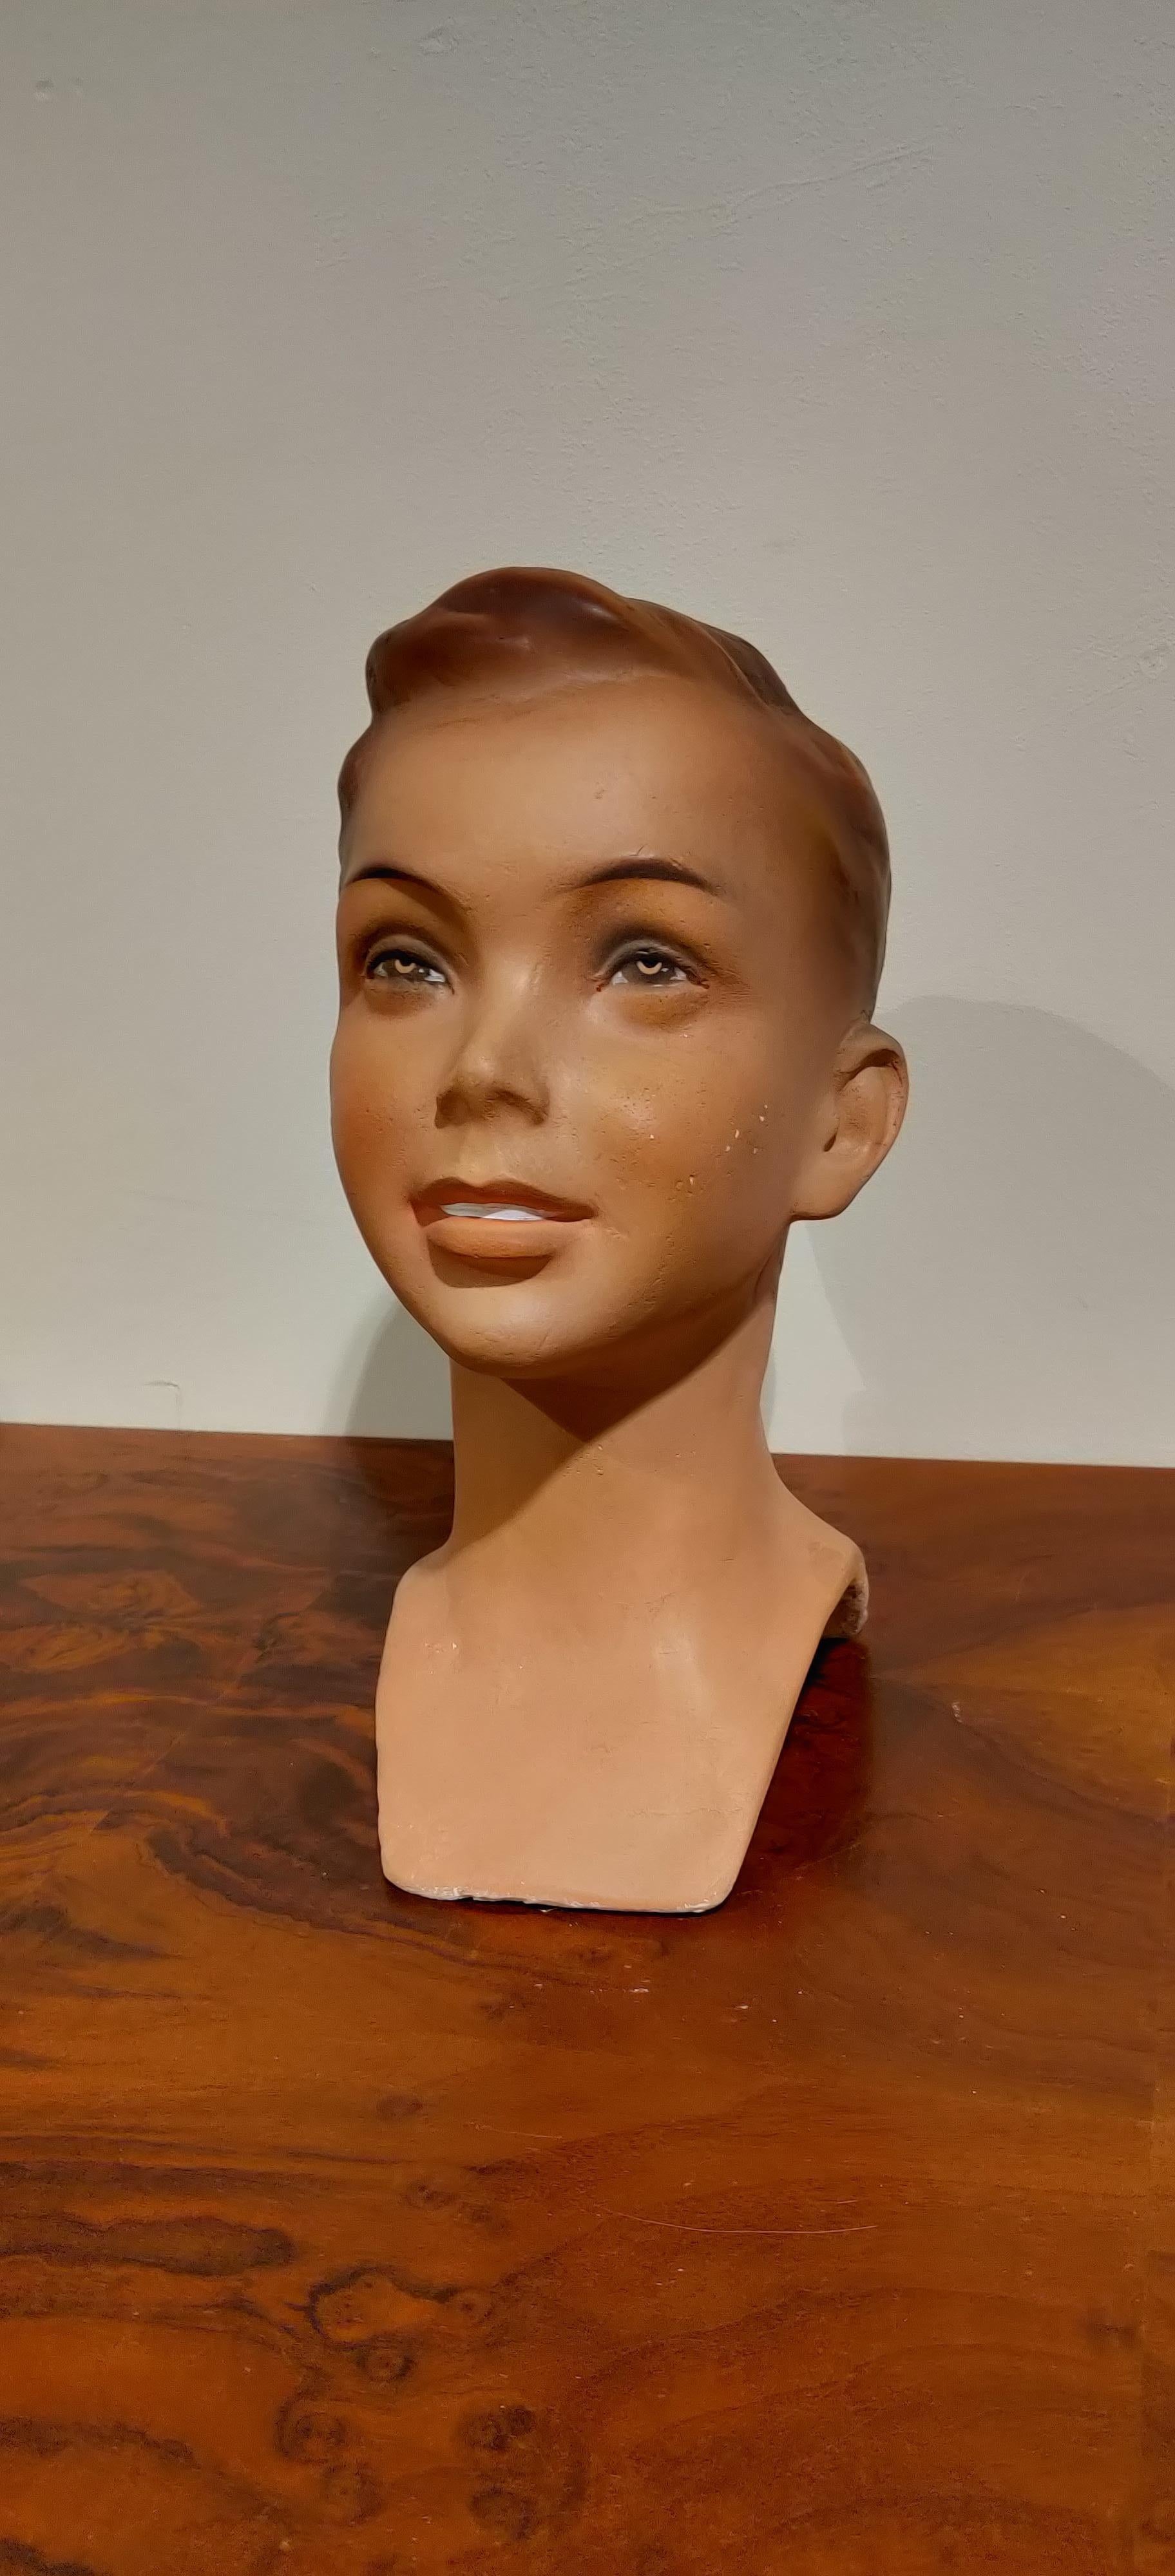 Beautiful child mannequin head made from plaster. 

It has some minor user traces.

Comes from a lot acquired from a clothes shop that stopped activities.

Great decorative item to display glasses, hats.

France, 1960s

Measure: Height